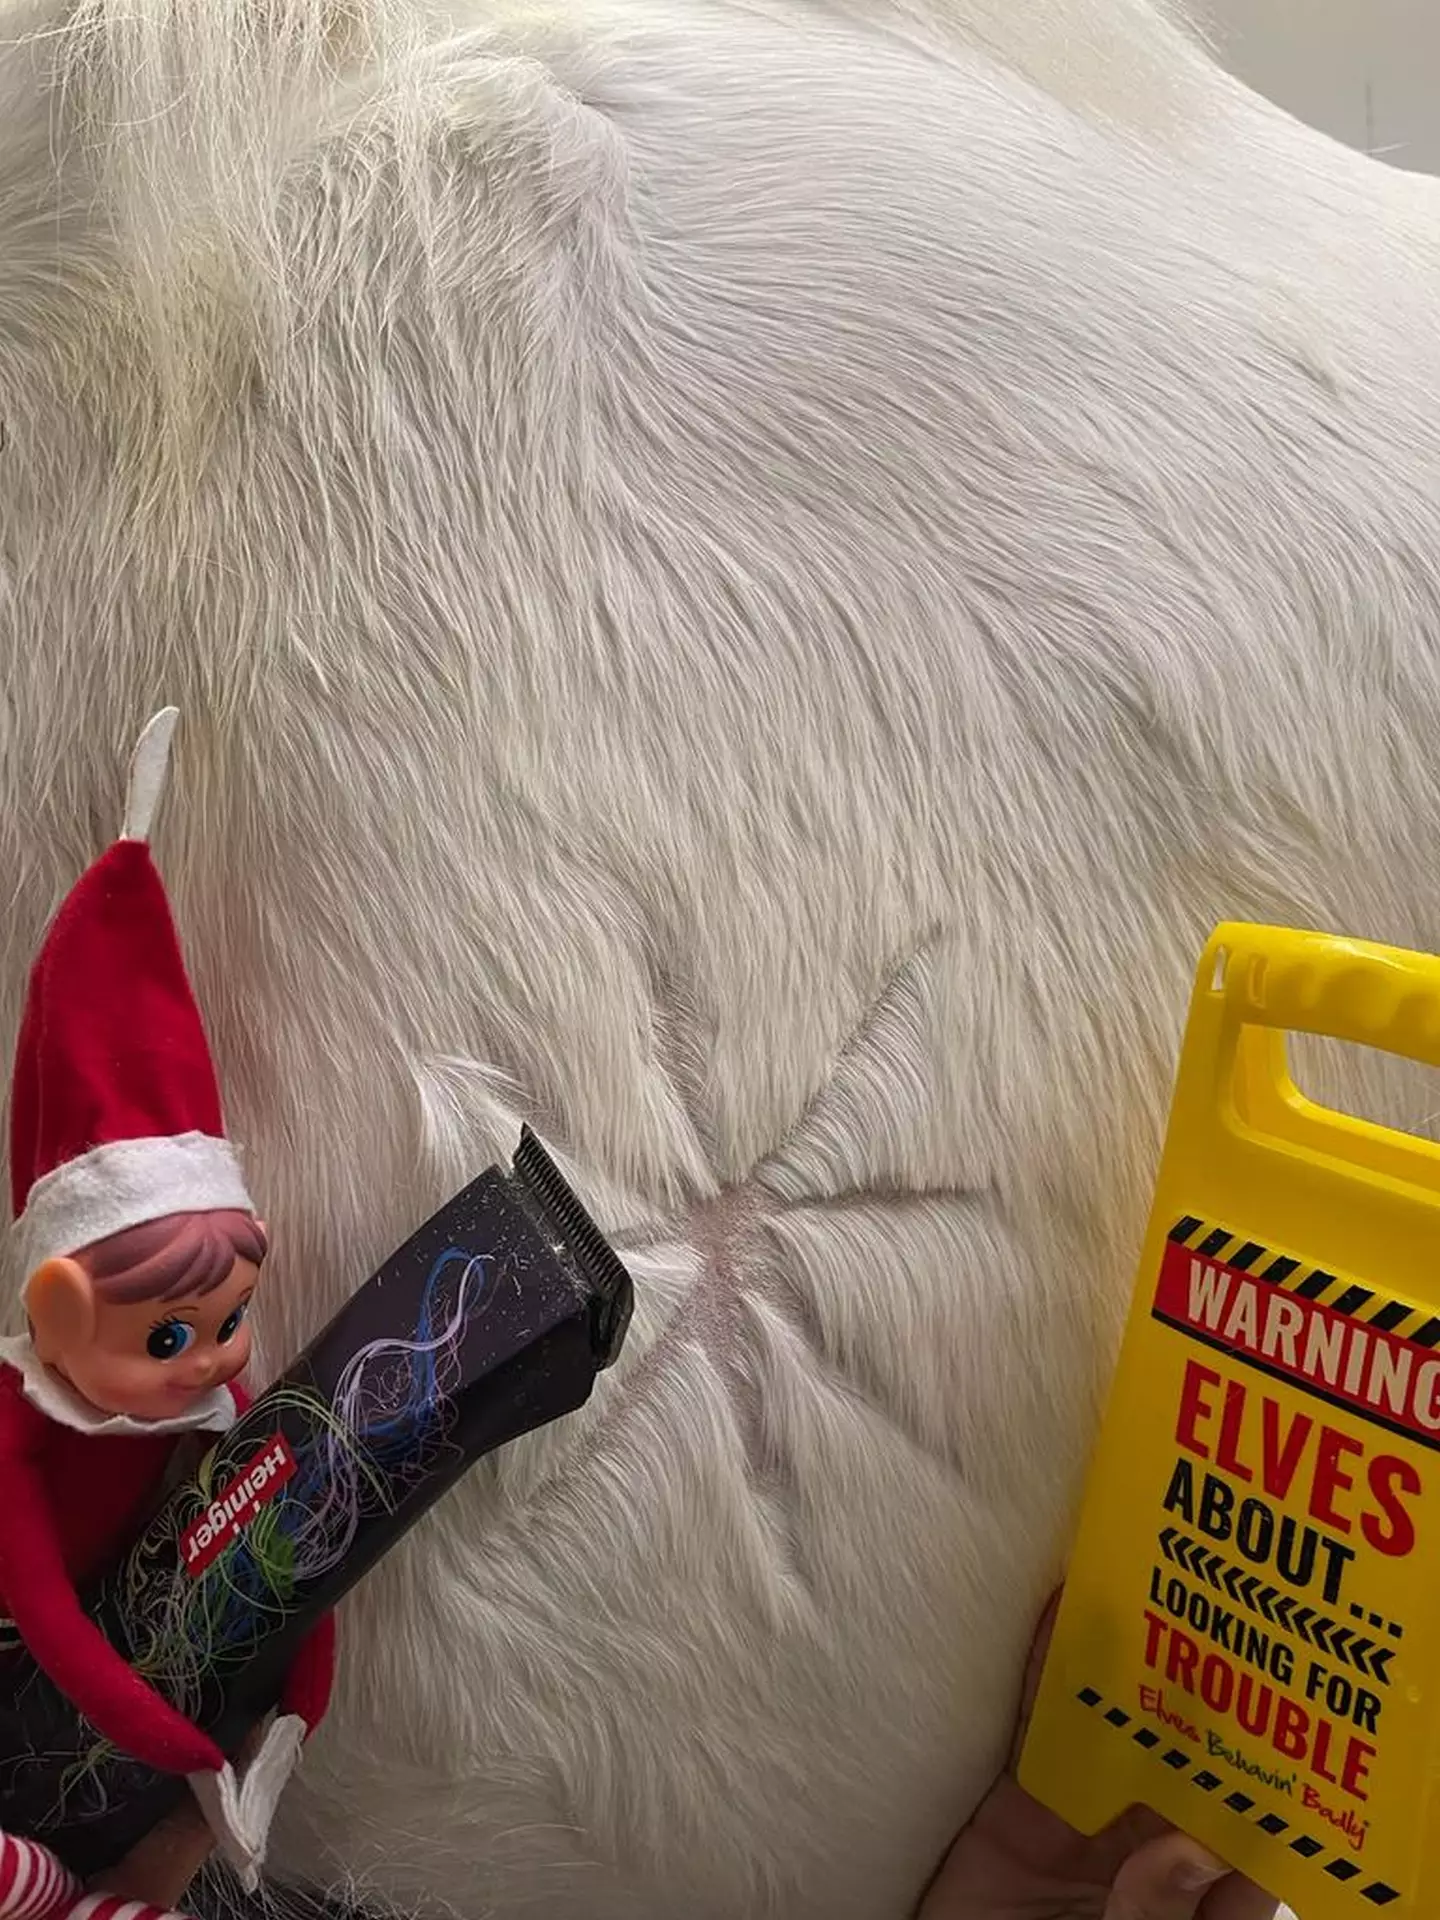 The vets have divided opinion with their animal-themed festive pranks.